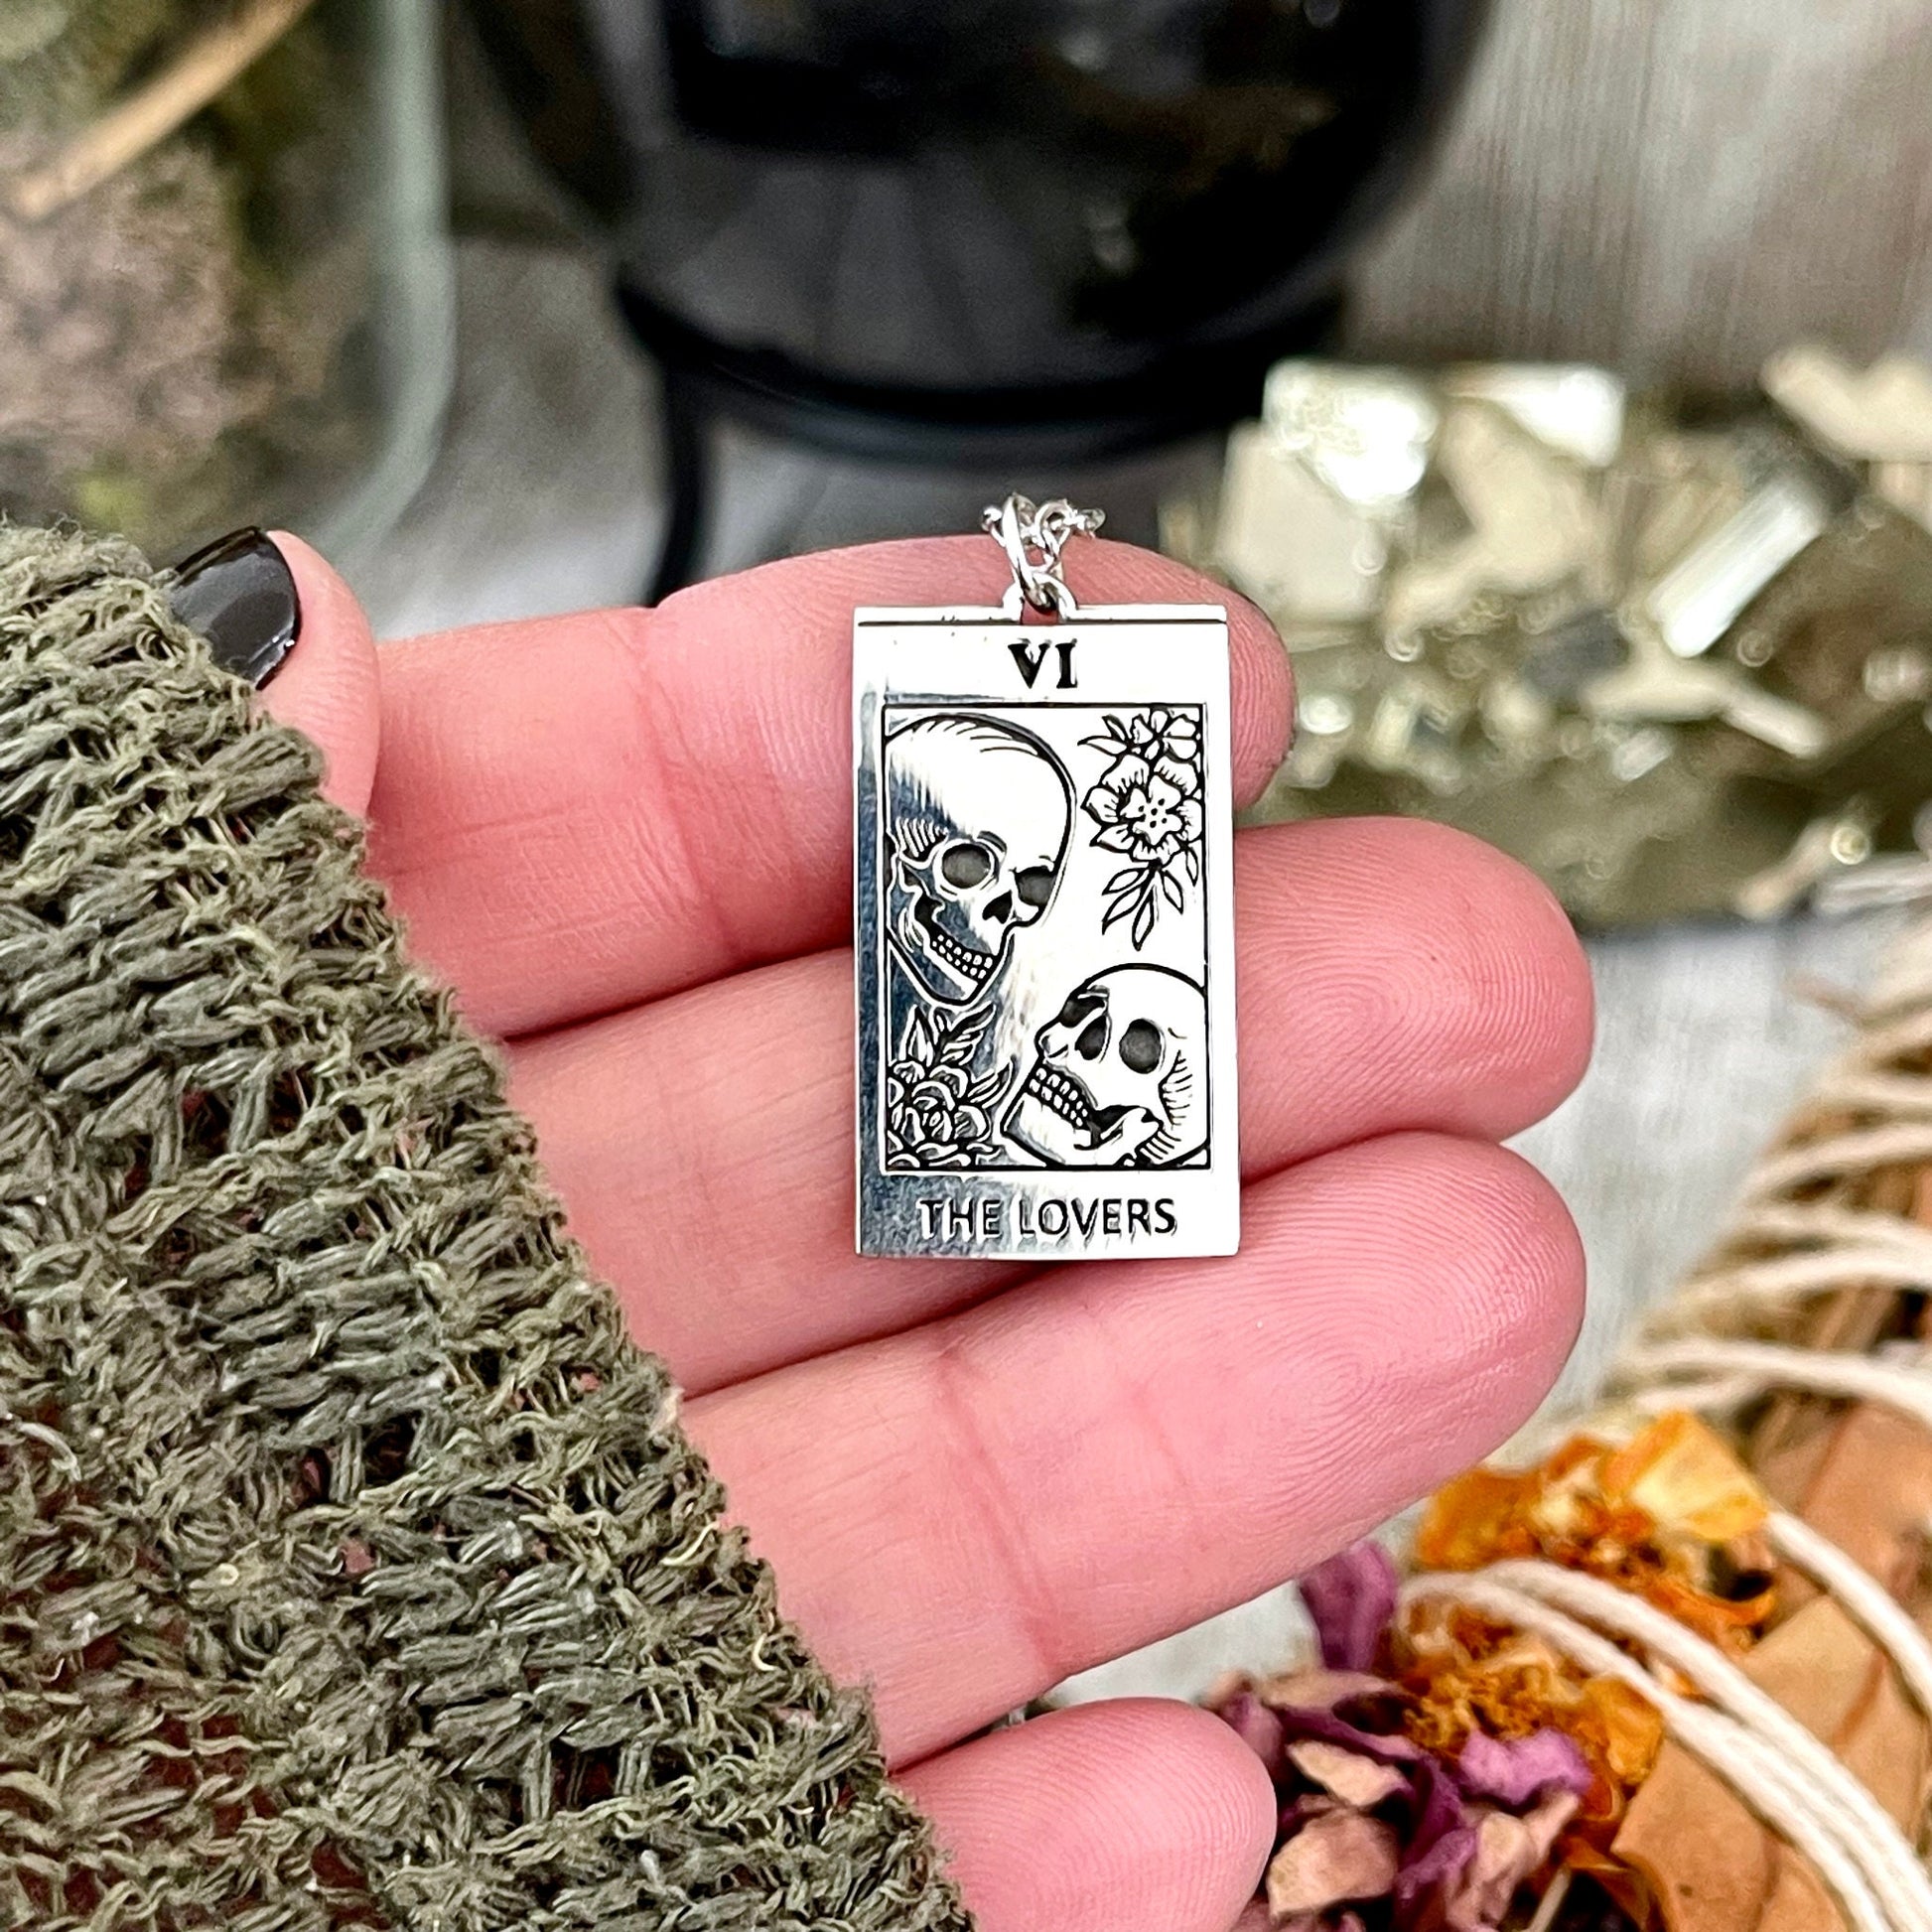 925 Sterling Silver, Etsy ID: 1403597695, Foxlark Alchemy, Gift for Woman, Gothic Jewelry, Jewelry, Necklace Pendant, Necklaces, Pendants, Skull Necklace, Skull Necklace Charm, Talisman Necklace, Tarot Card Necklace, The Lovers, TINY TALISMANS, Witch Jewe